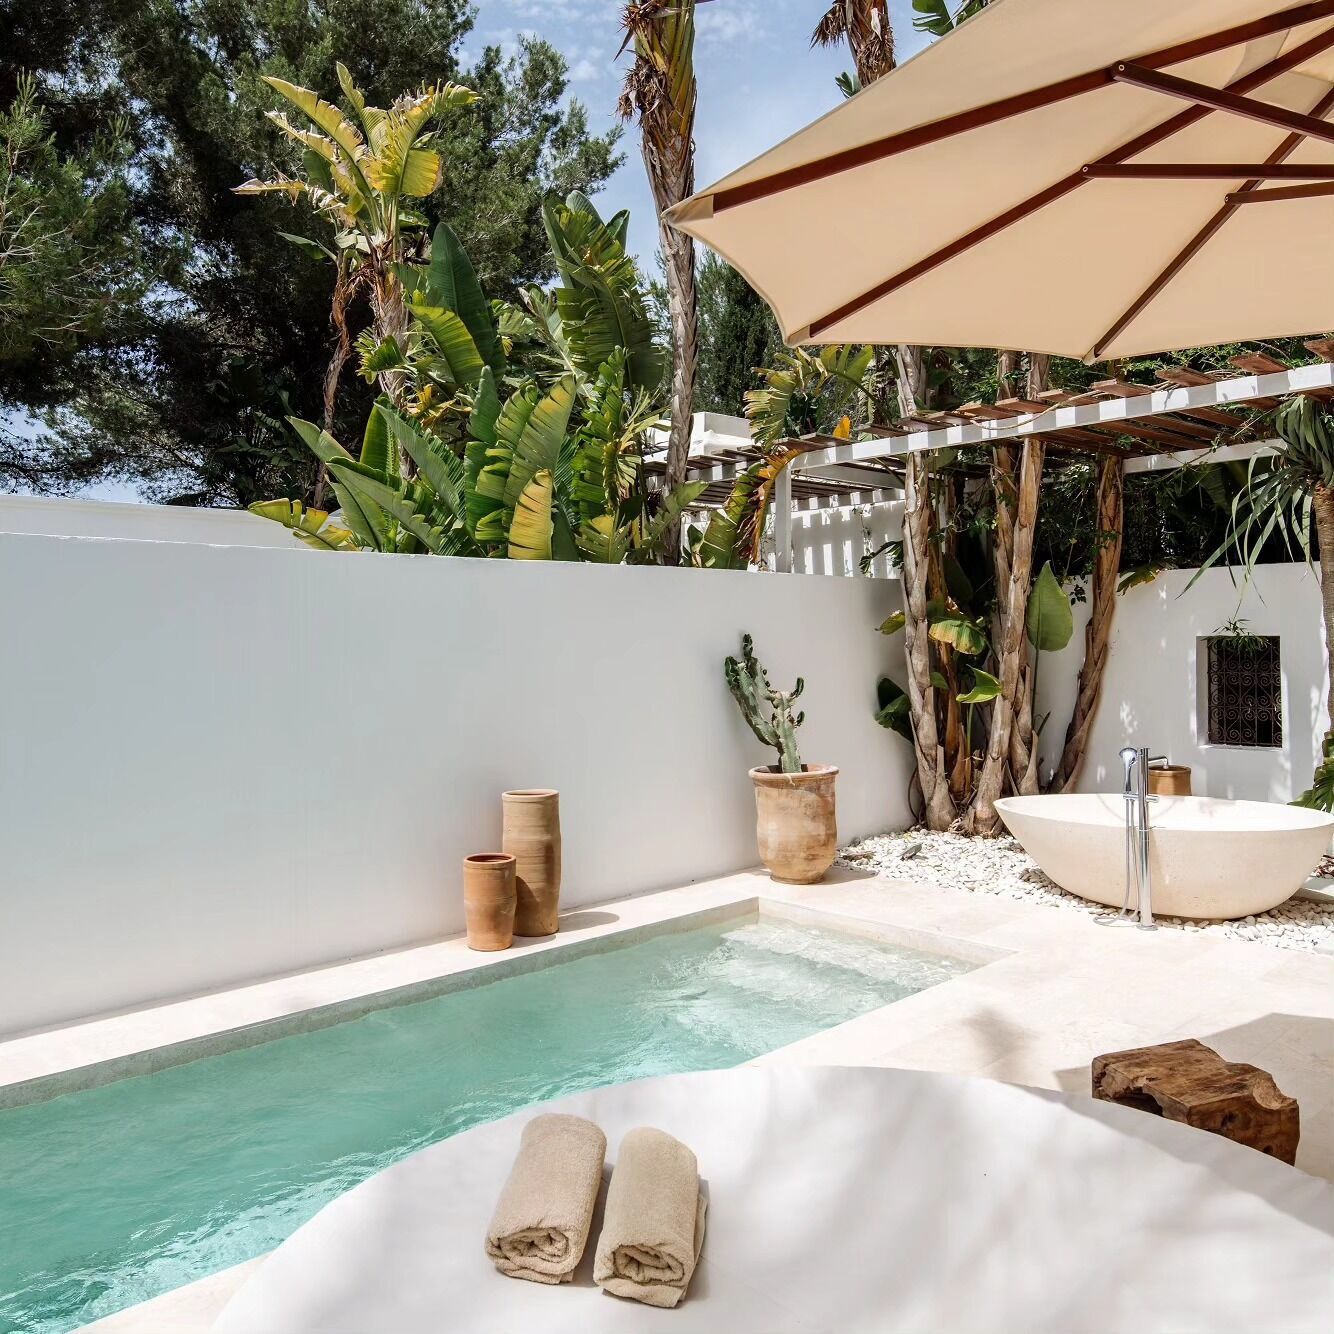 Top 10 family hotels in Ibiza. Comfortable vacation together among Instagrammable beaches and entertainment for all ages